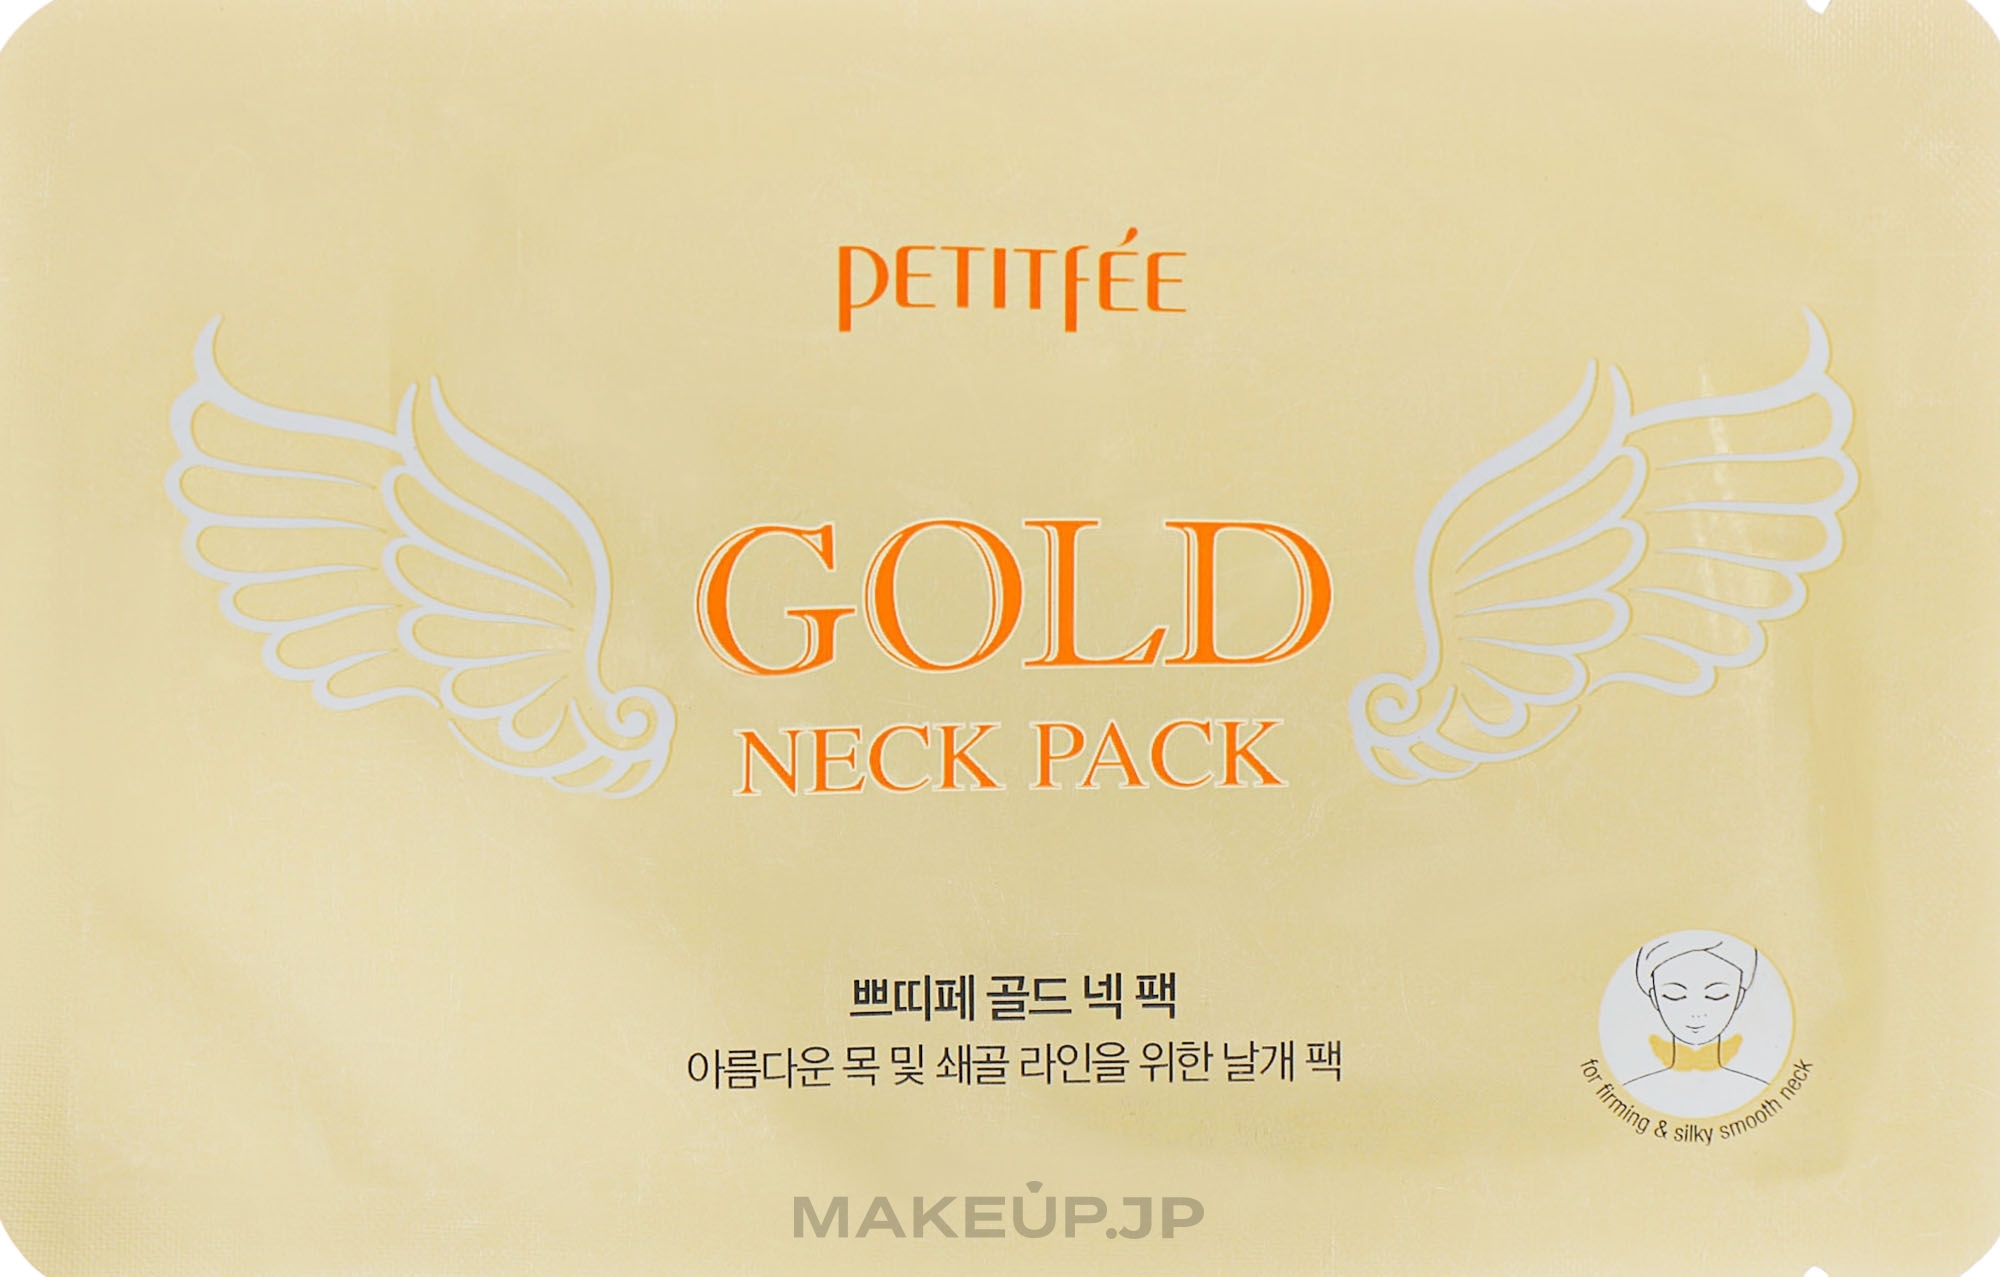 Neck Hydrogel Mask with Placenta - Petitfee & Koelf "HYDROGEL ANGEL WINGS" Gold Neck Pack — photo 1 szt.